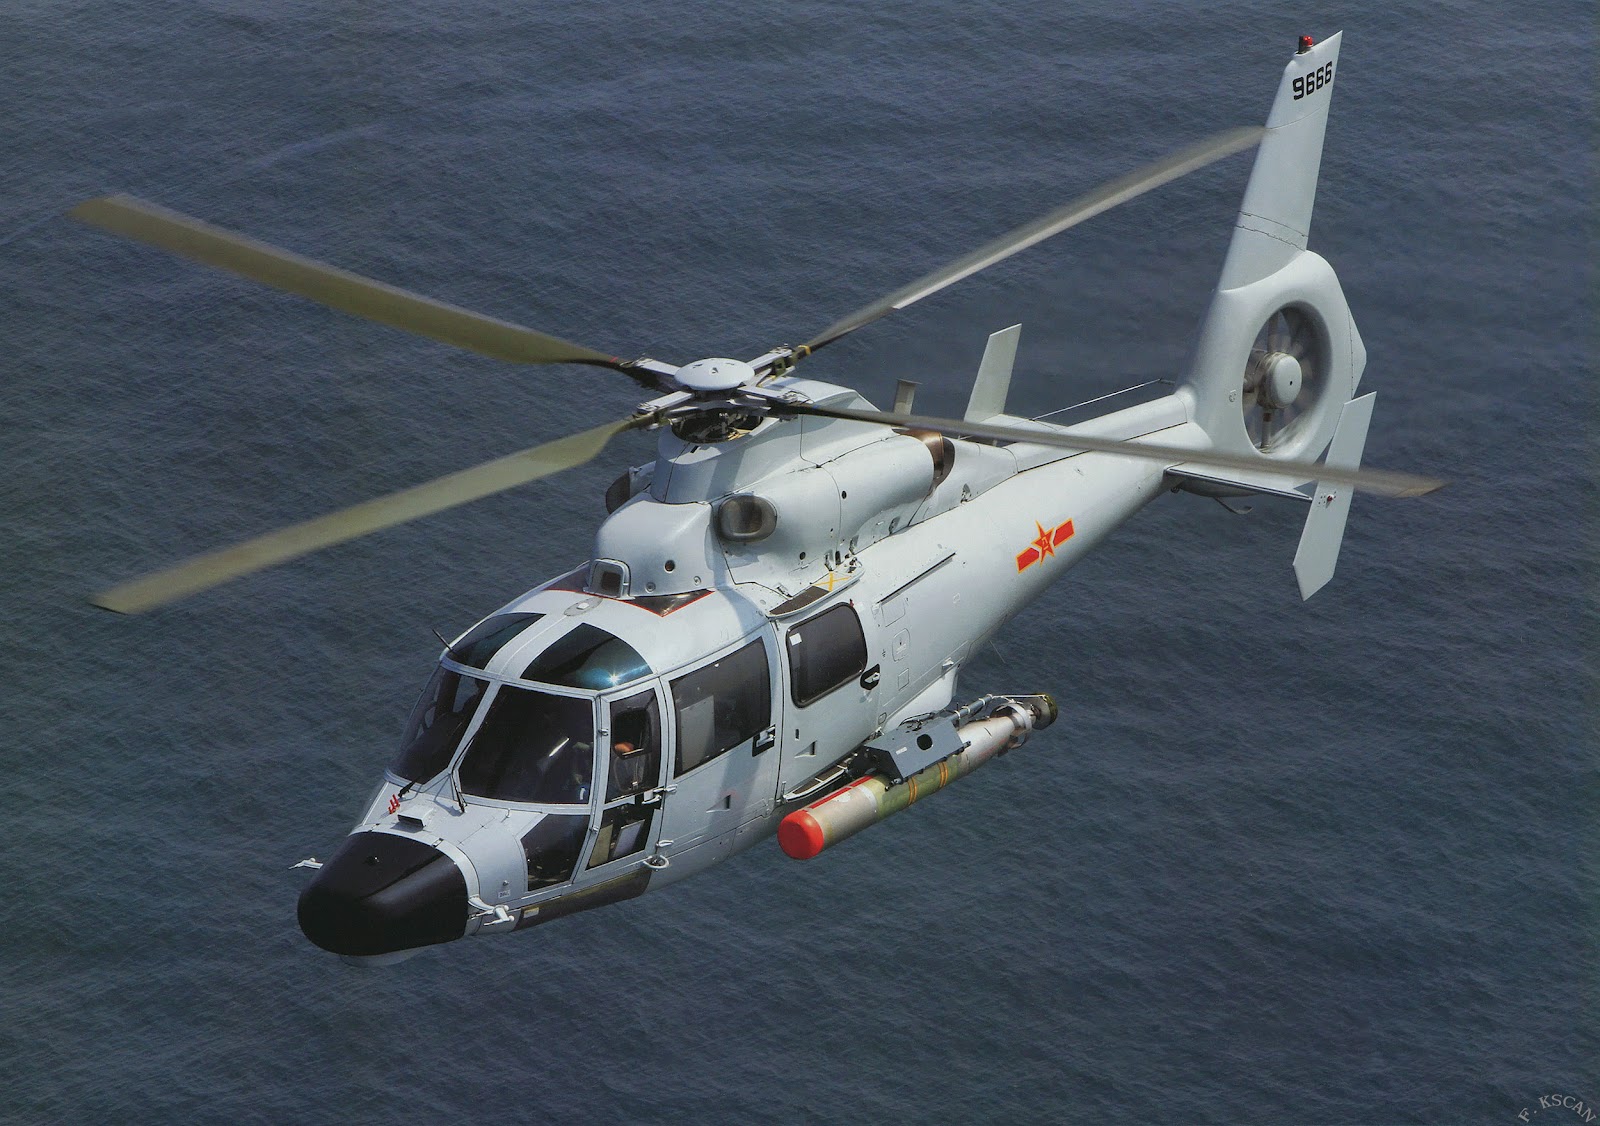 Harbin+helicopter.+Z-9EC+ASW+Naval+Air+Arm+pulse-compression+radar,+low+frequency+dipping+sonar,+radar+warning+receiver+and+doppler+navigation+system,+torpedoes+frigates+(3).jpg